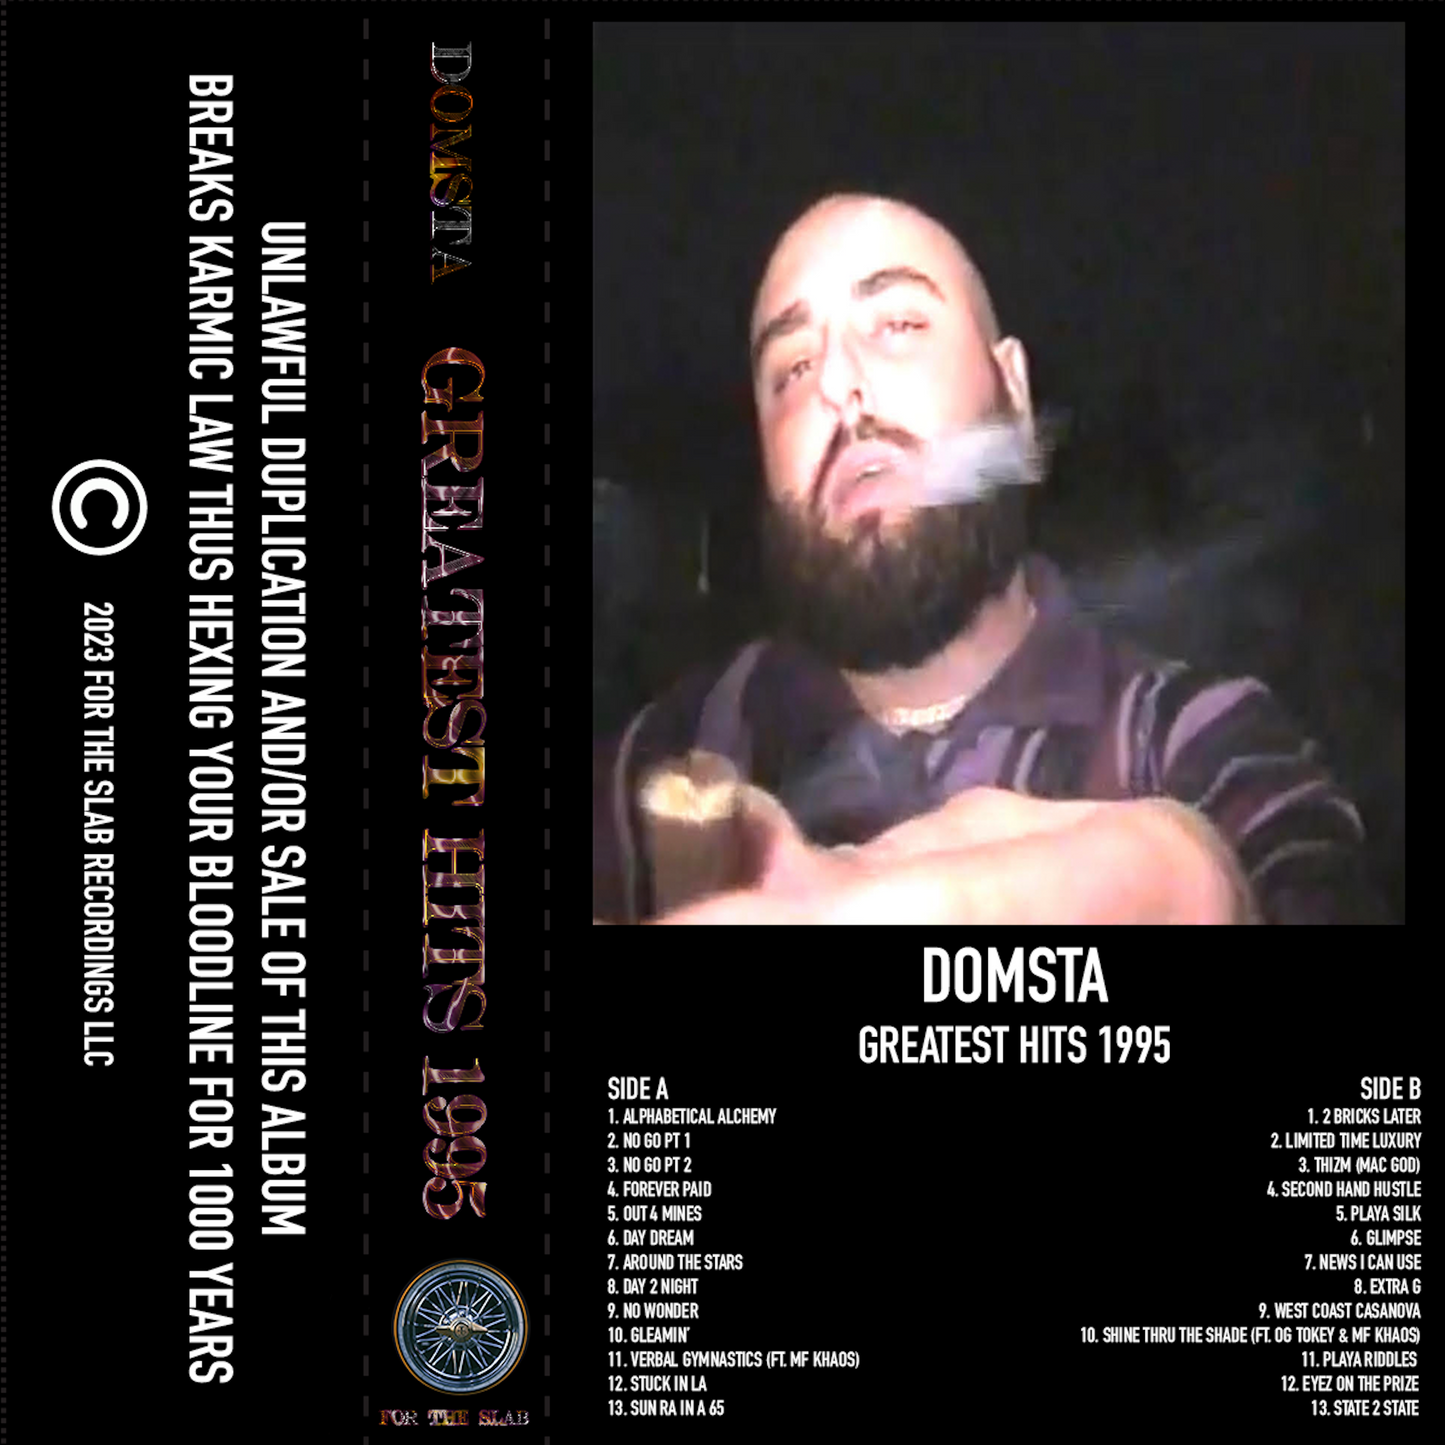 DOMSTA GREATEST HITS 1995 PHYSICALS